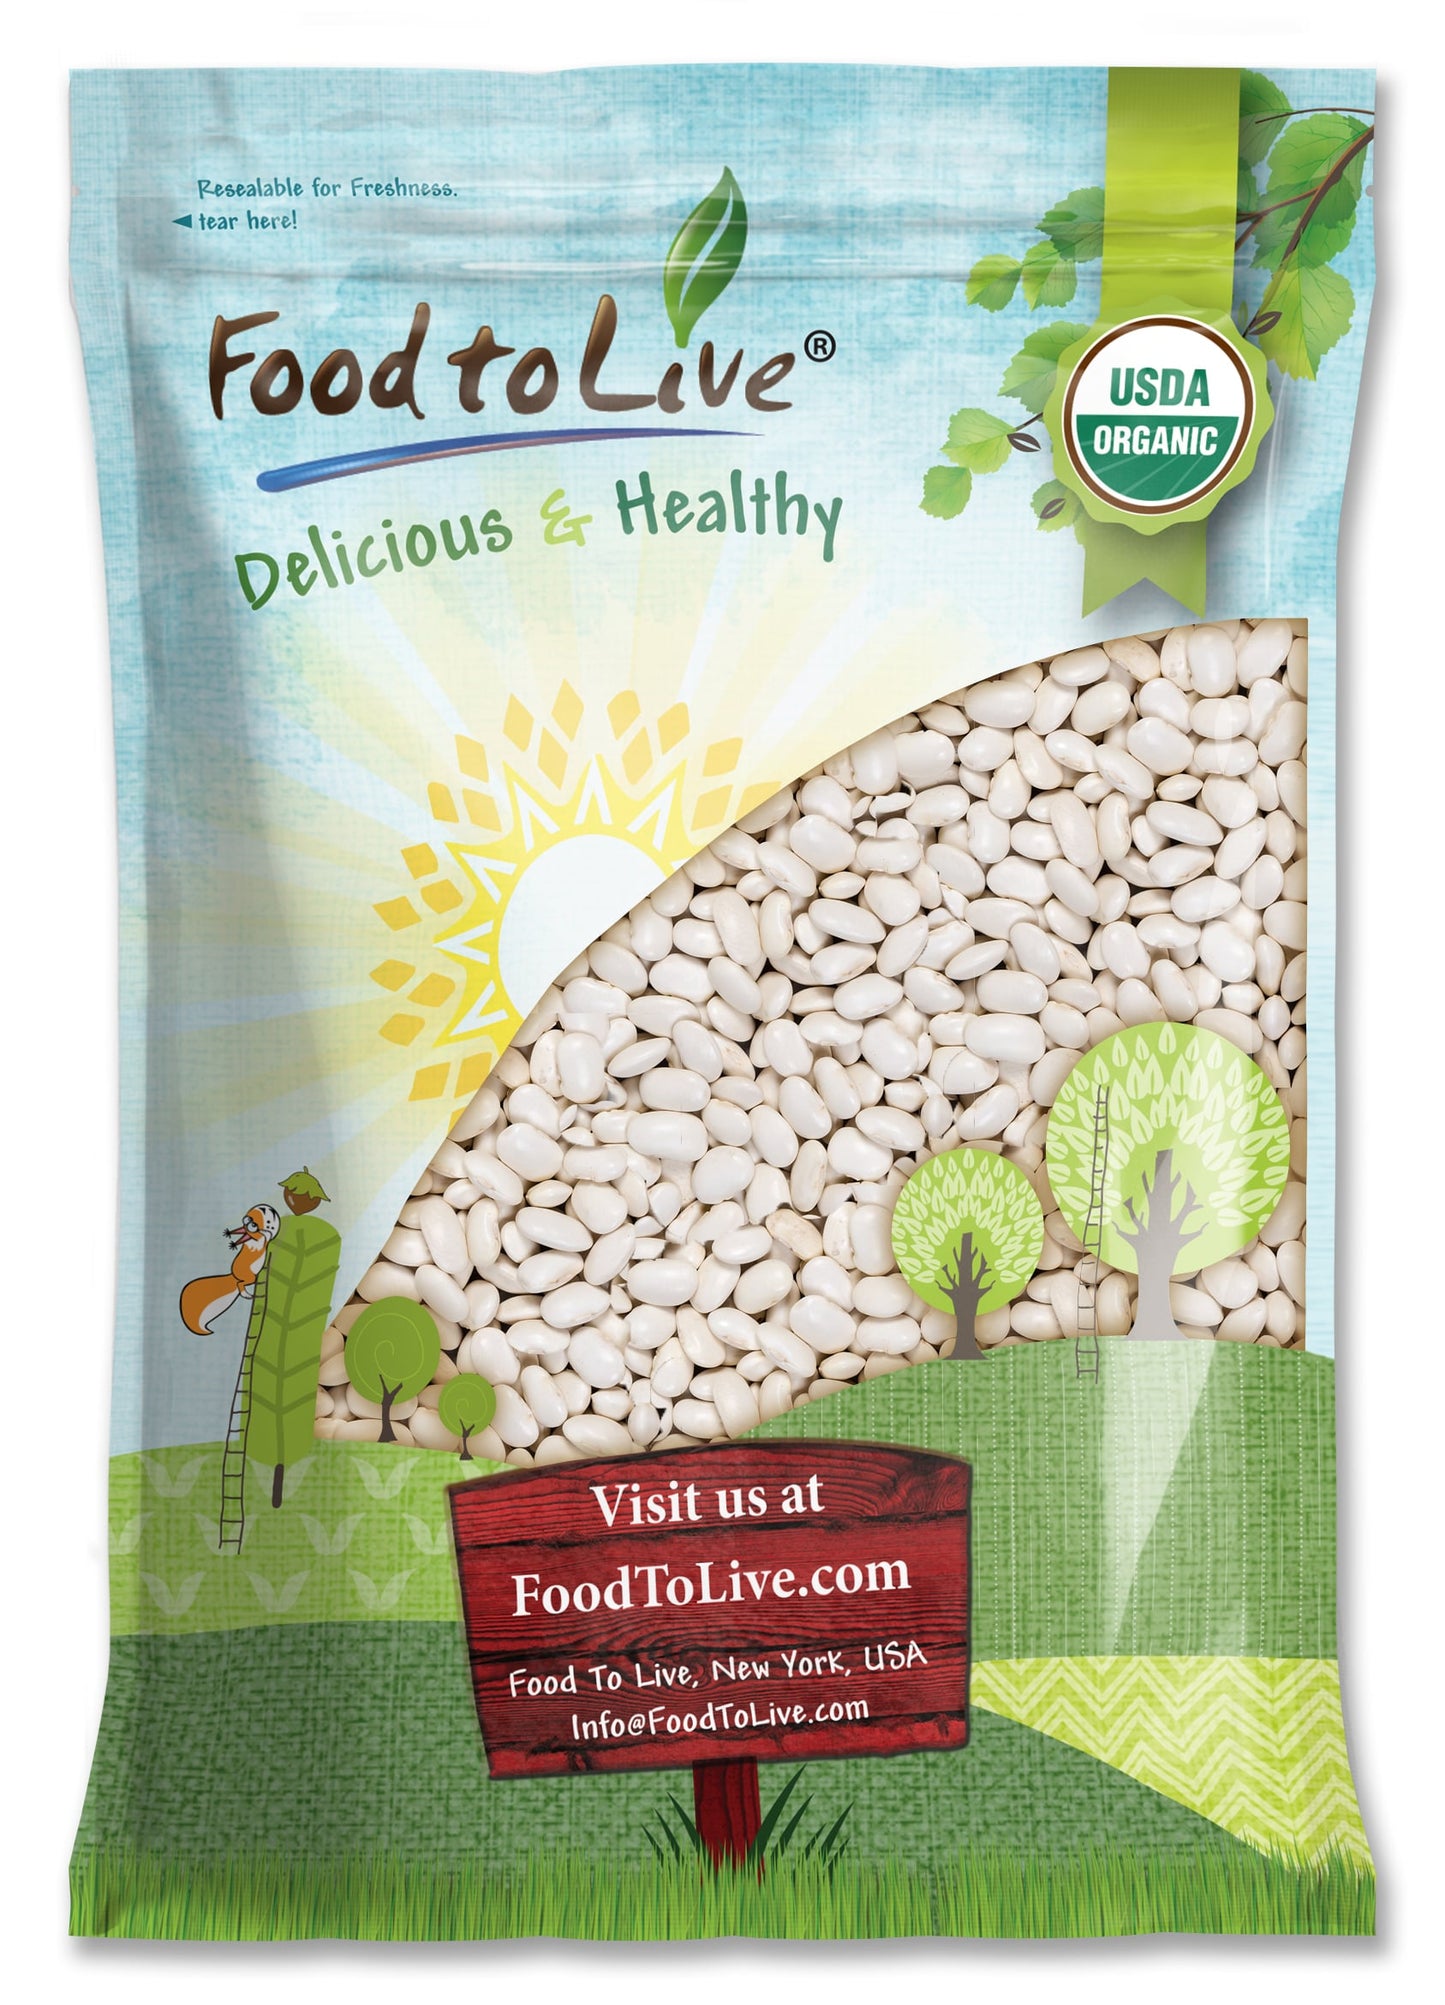 Organic Large White Kidney Beans — Whole Raw Dried Beans, Vegan, Kosher, Bulk. Rich in Dietary Fiber and Protein. Perfect for Soups, Stews, Chili, Paste, Salads and Side Dishes